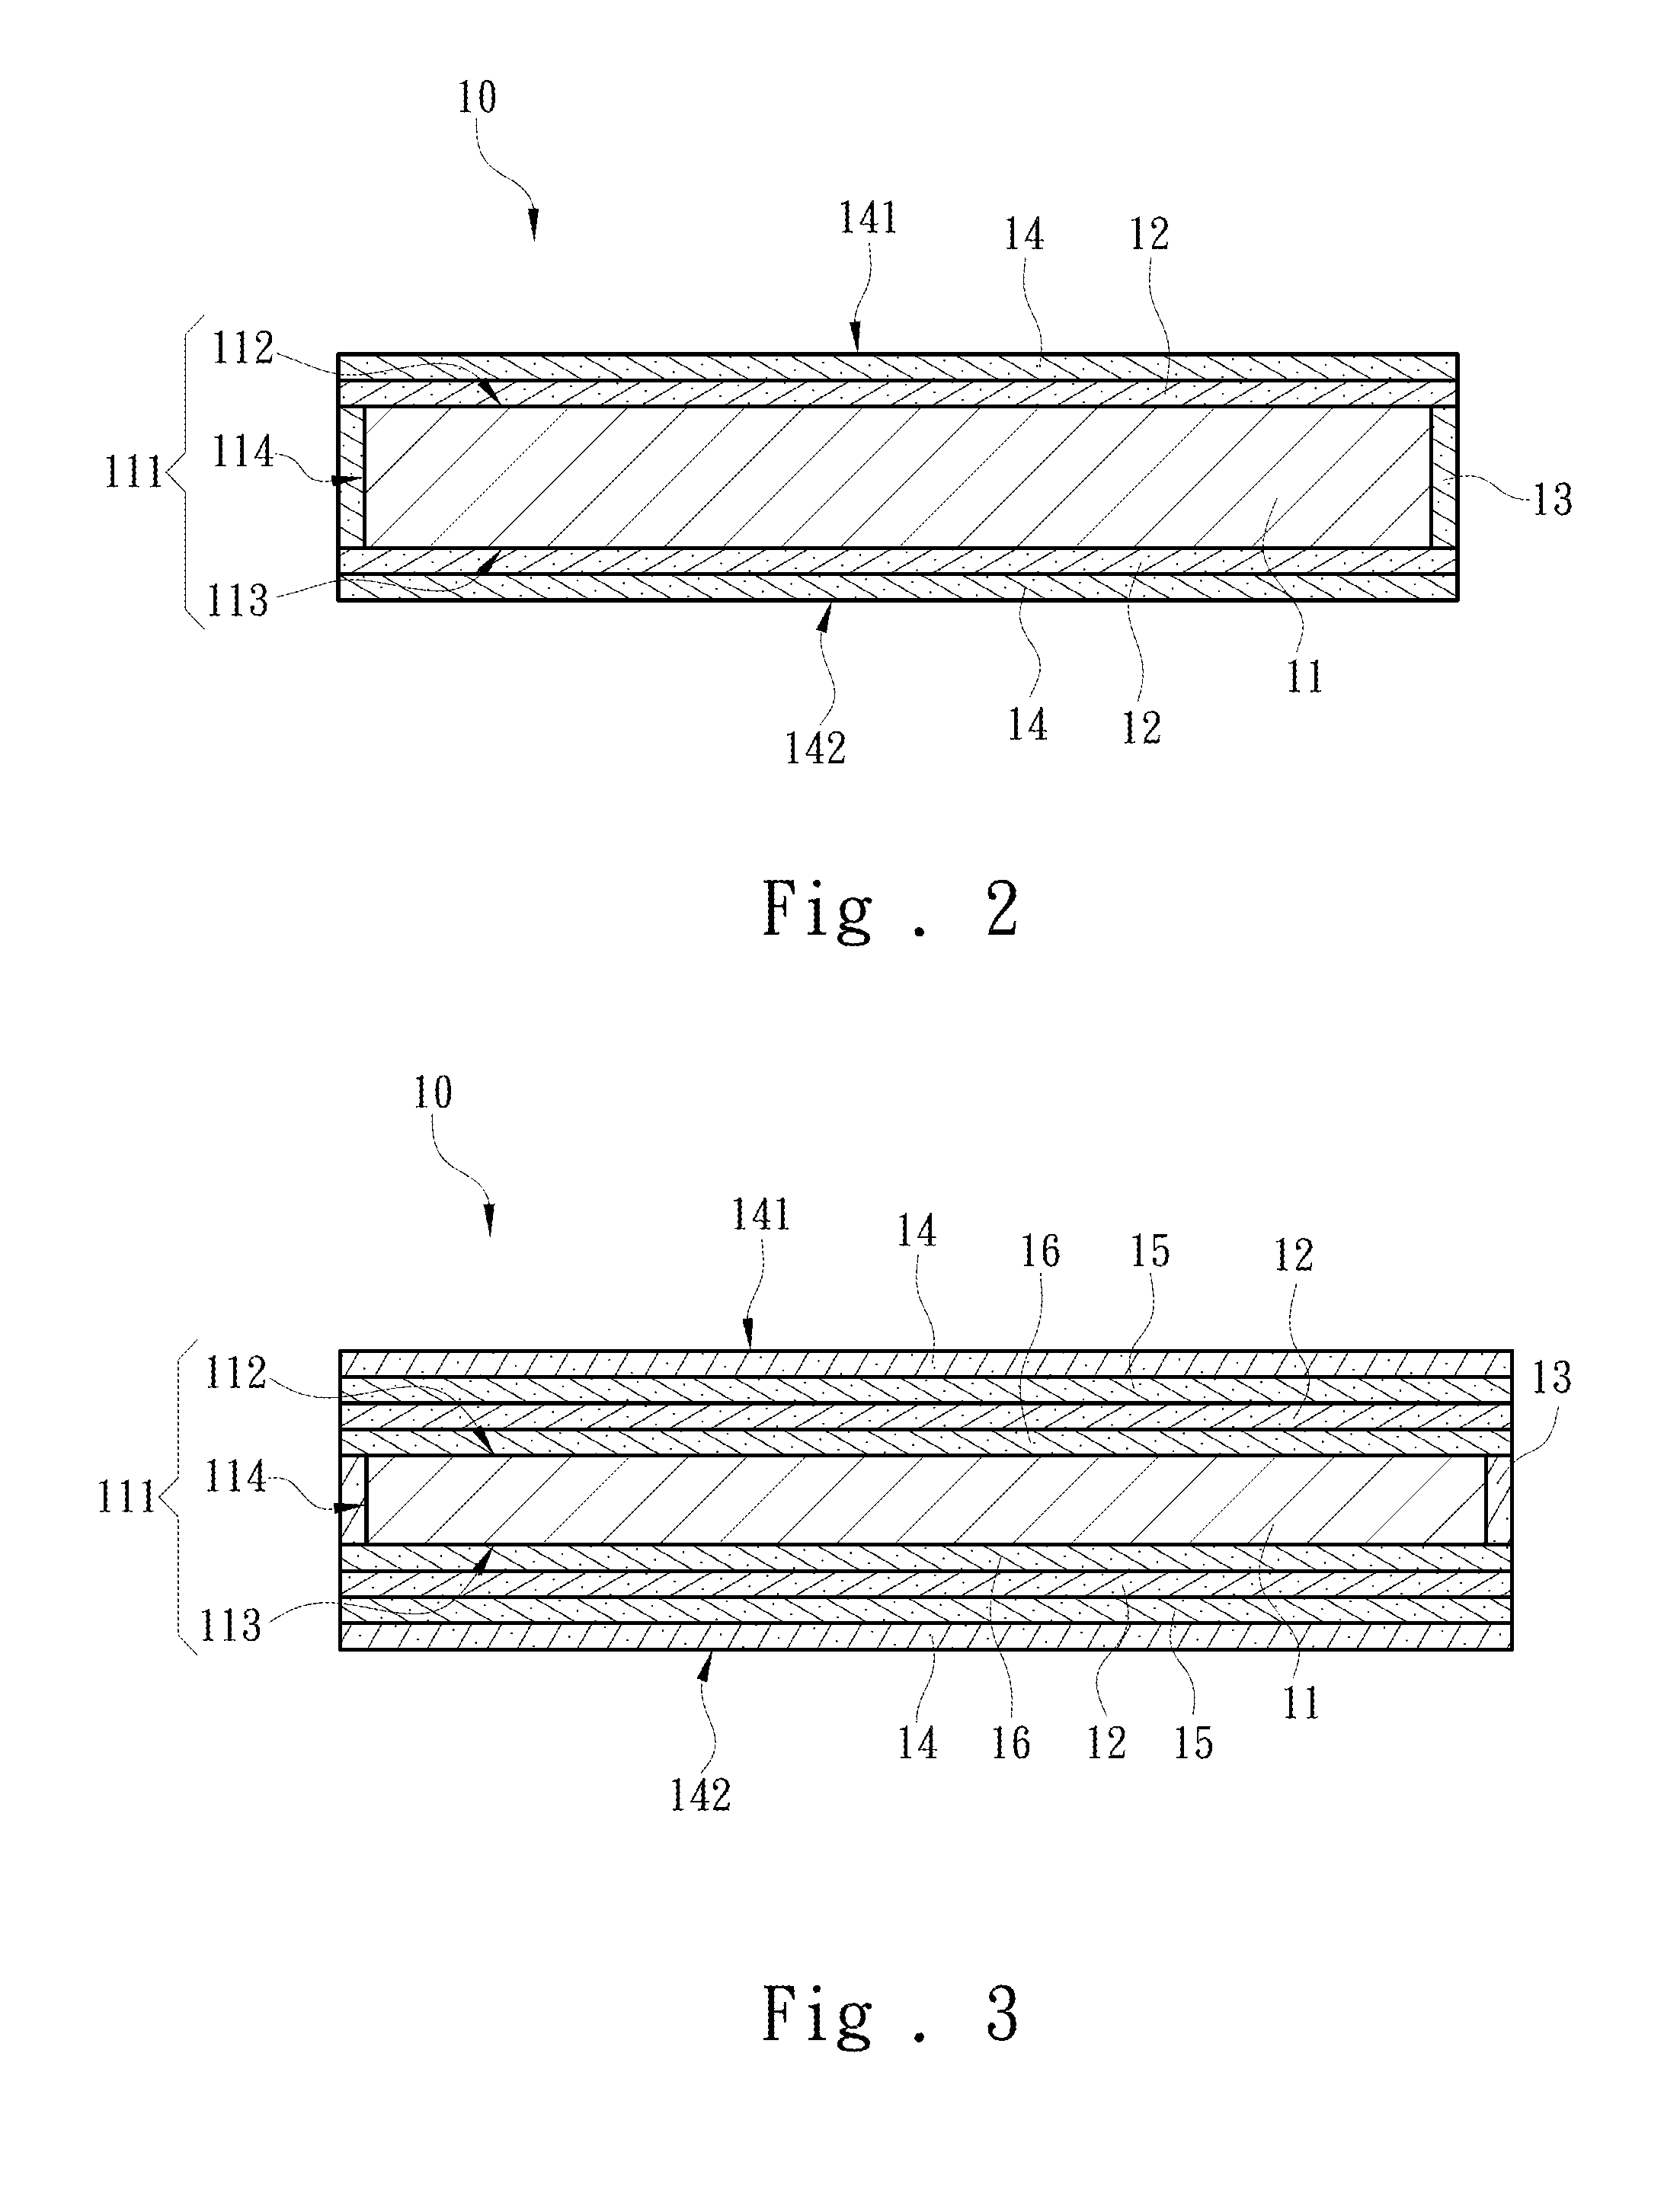 Electrochemical double-cell plate and apparatus for exhaust emissions control